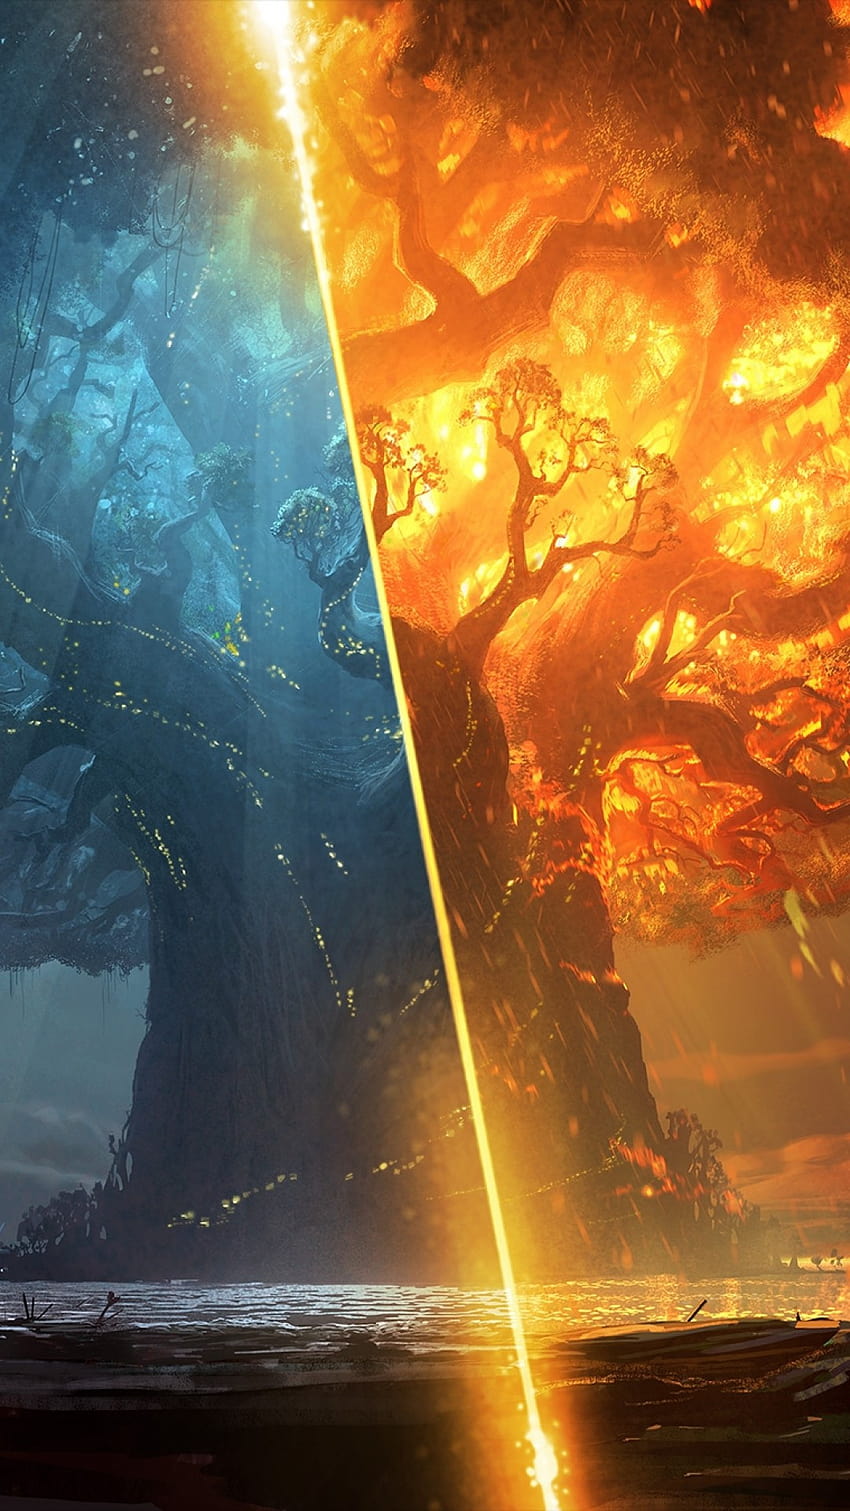 1080x1920 World Of Warcraft: Battle For Azeroth, Hell And Heaven para iPhone 8, iPhone 7 Plus, iPhone 6+, Sony Xperia Z, HTC One, cielo contra infierno fondo de pantalla del teléfono